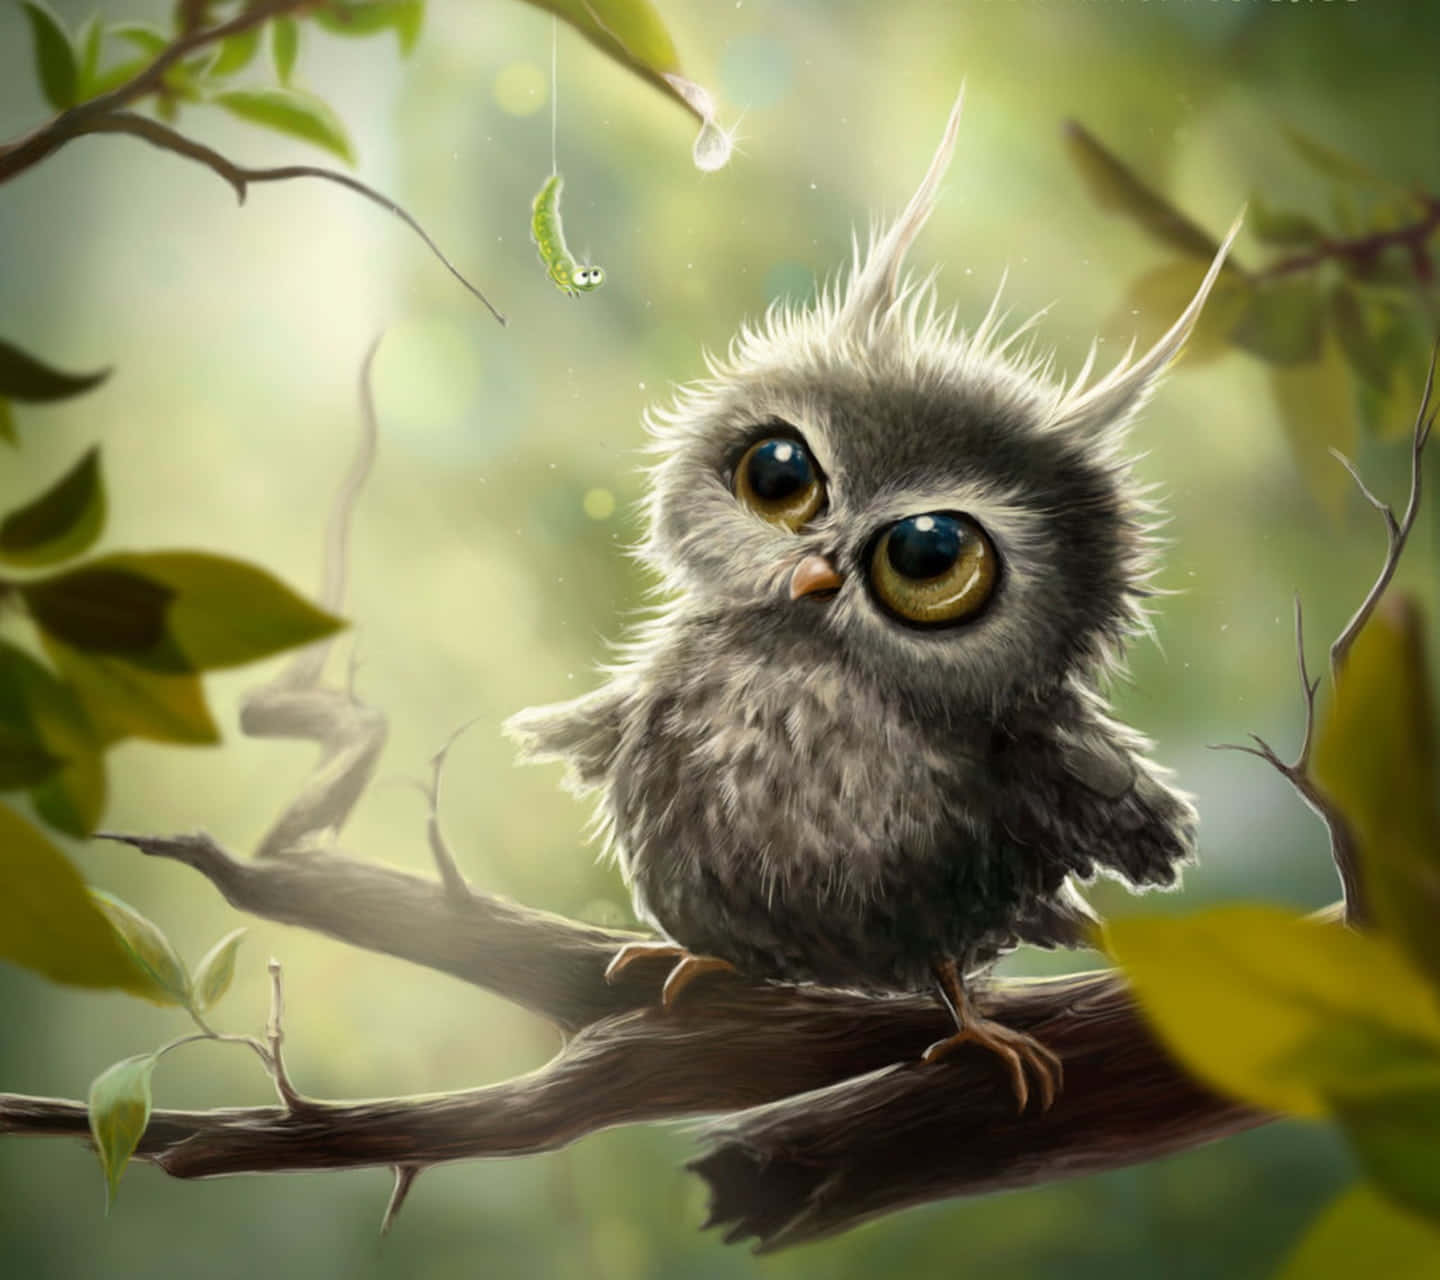 This cute owl will brighten up your day!